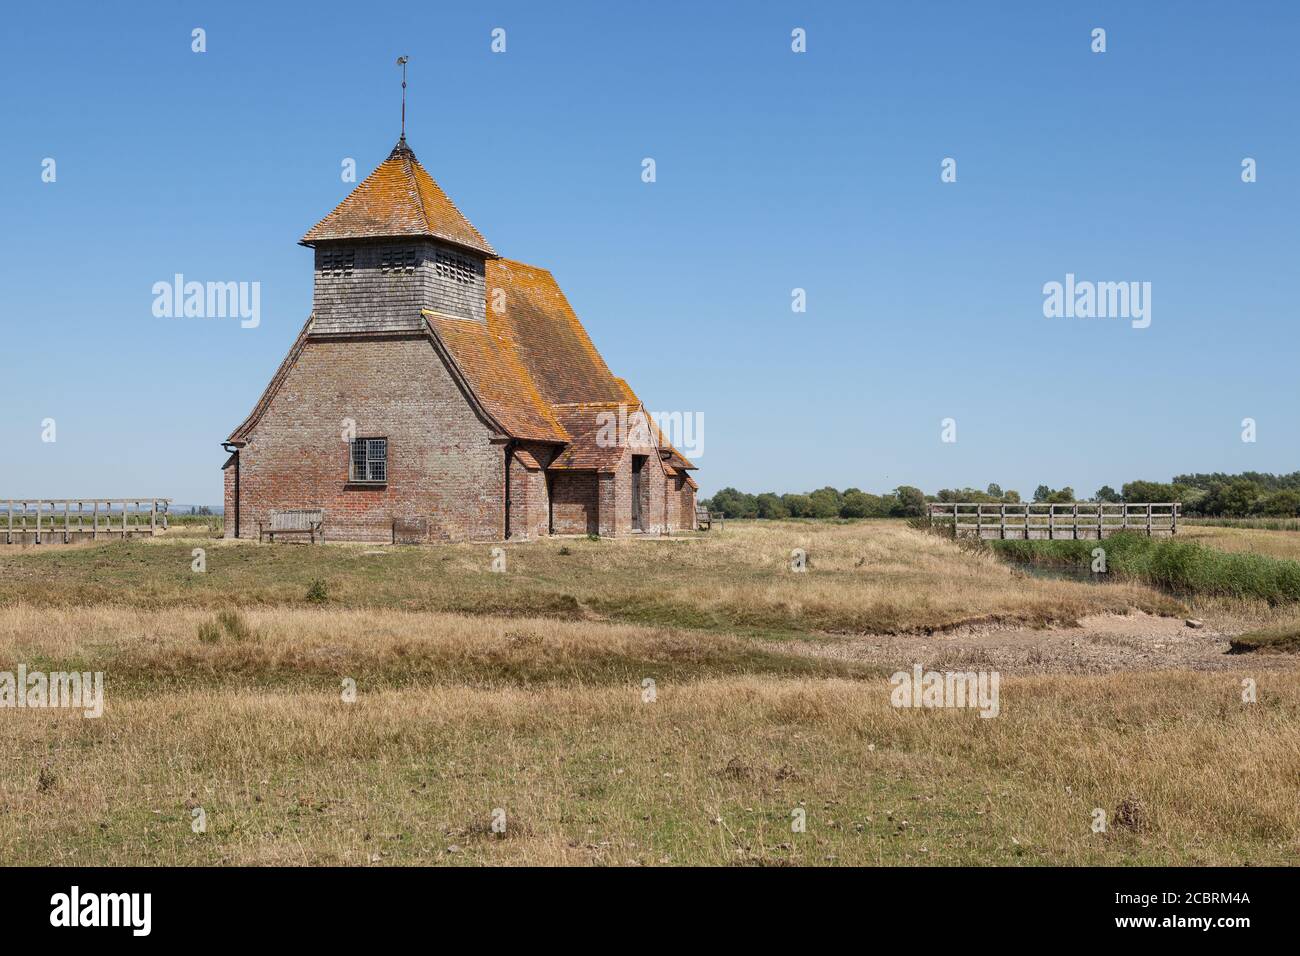 St Thomas à Becket Church in Fairfield, Kent, on a sunny day. Stock Photo